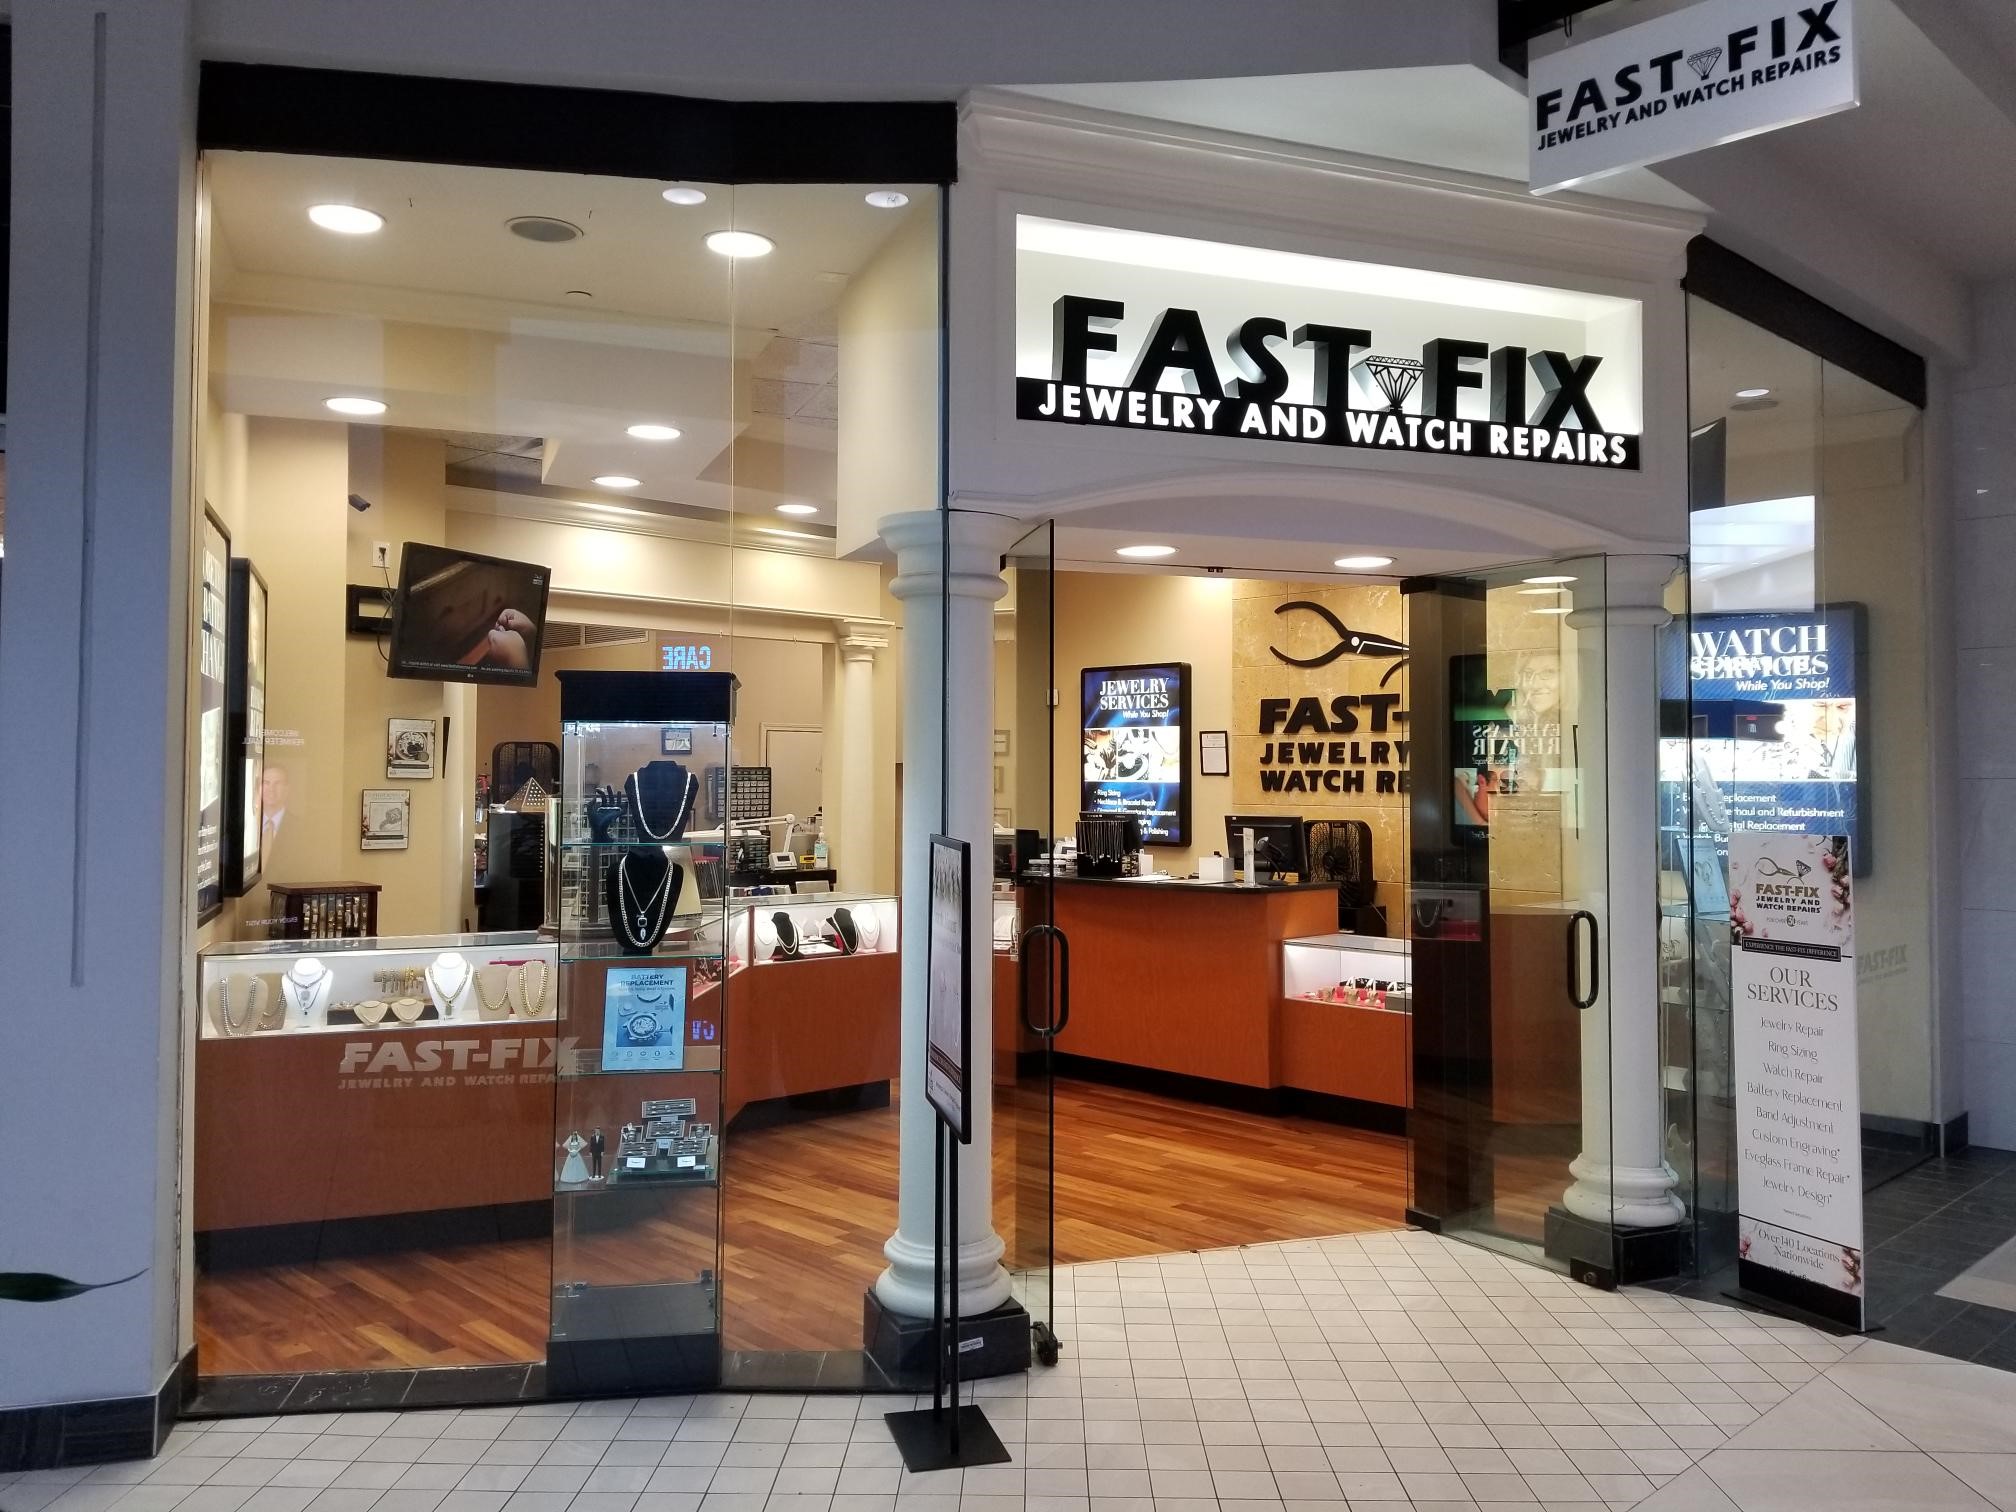 Fast-Fix Jewelry and Watch Repairs Perimeter Mall Storefront